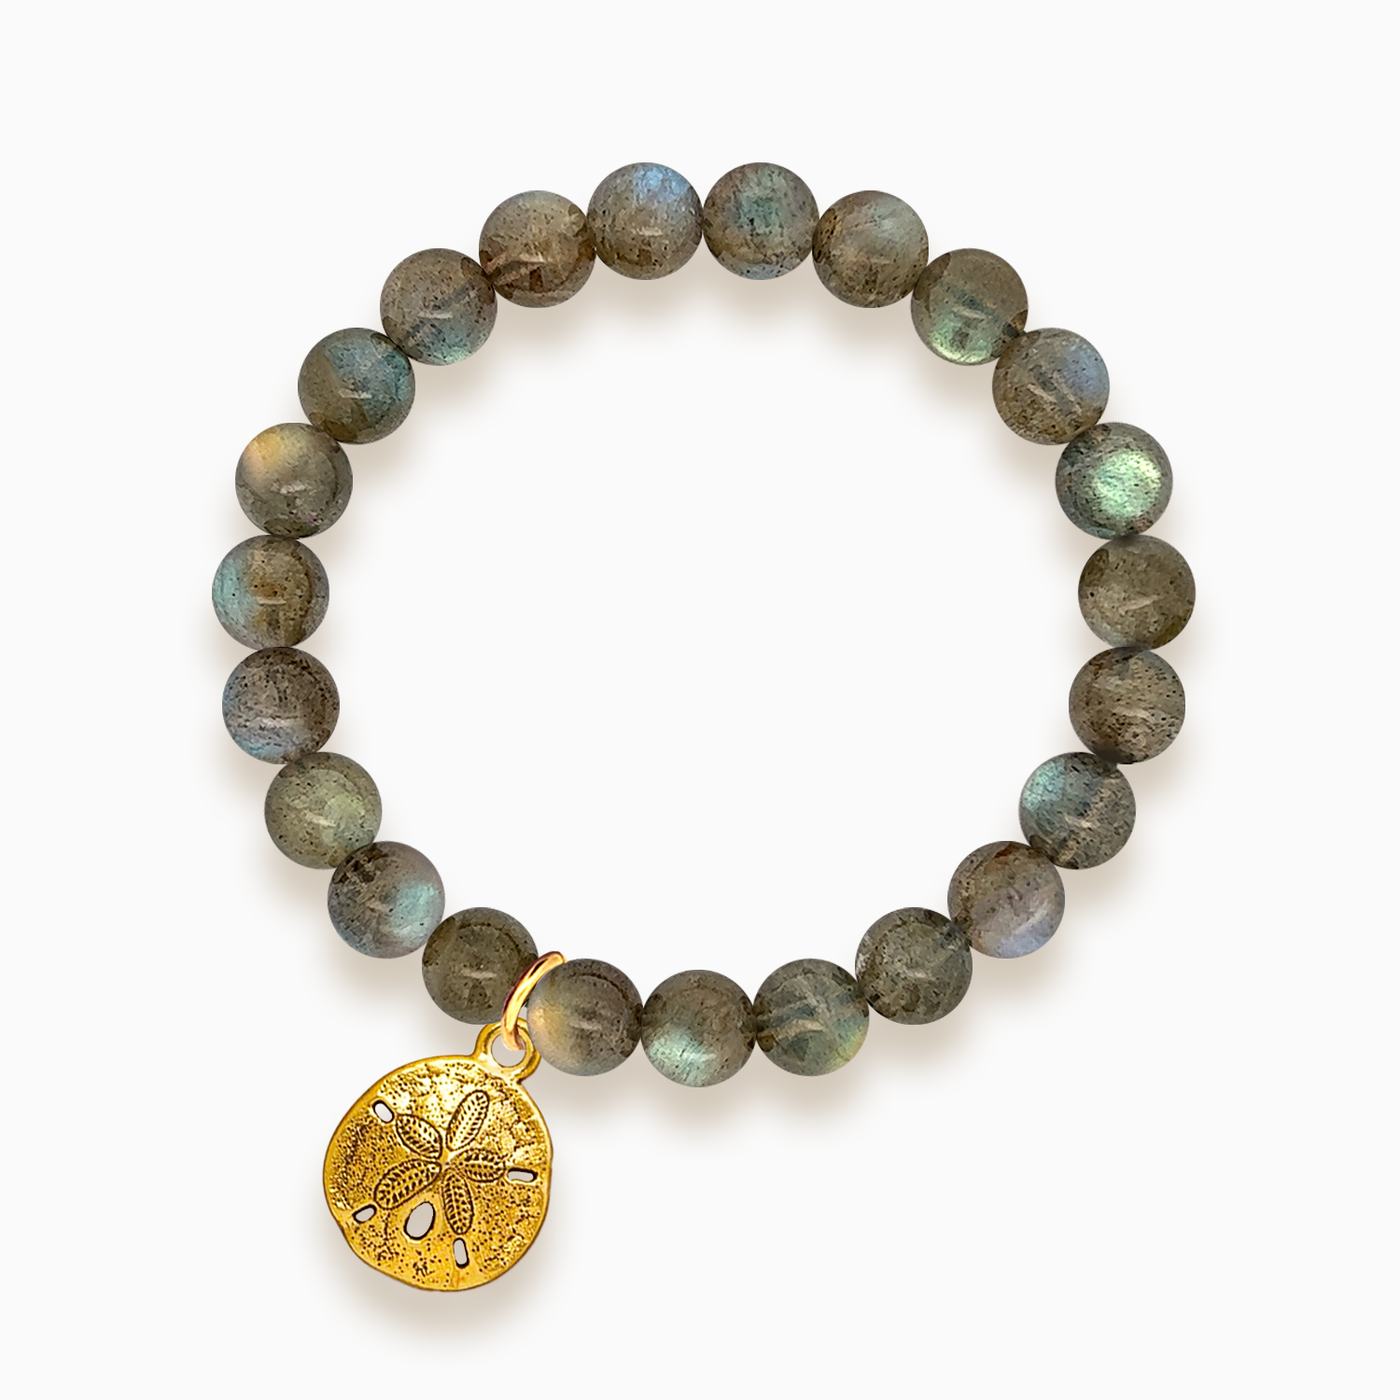 Gemstone Stacker Bracelet With Gold Plated Sand Dollar Charm